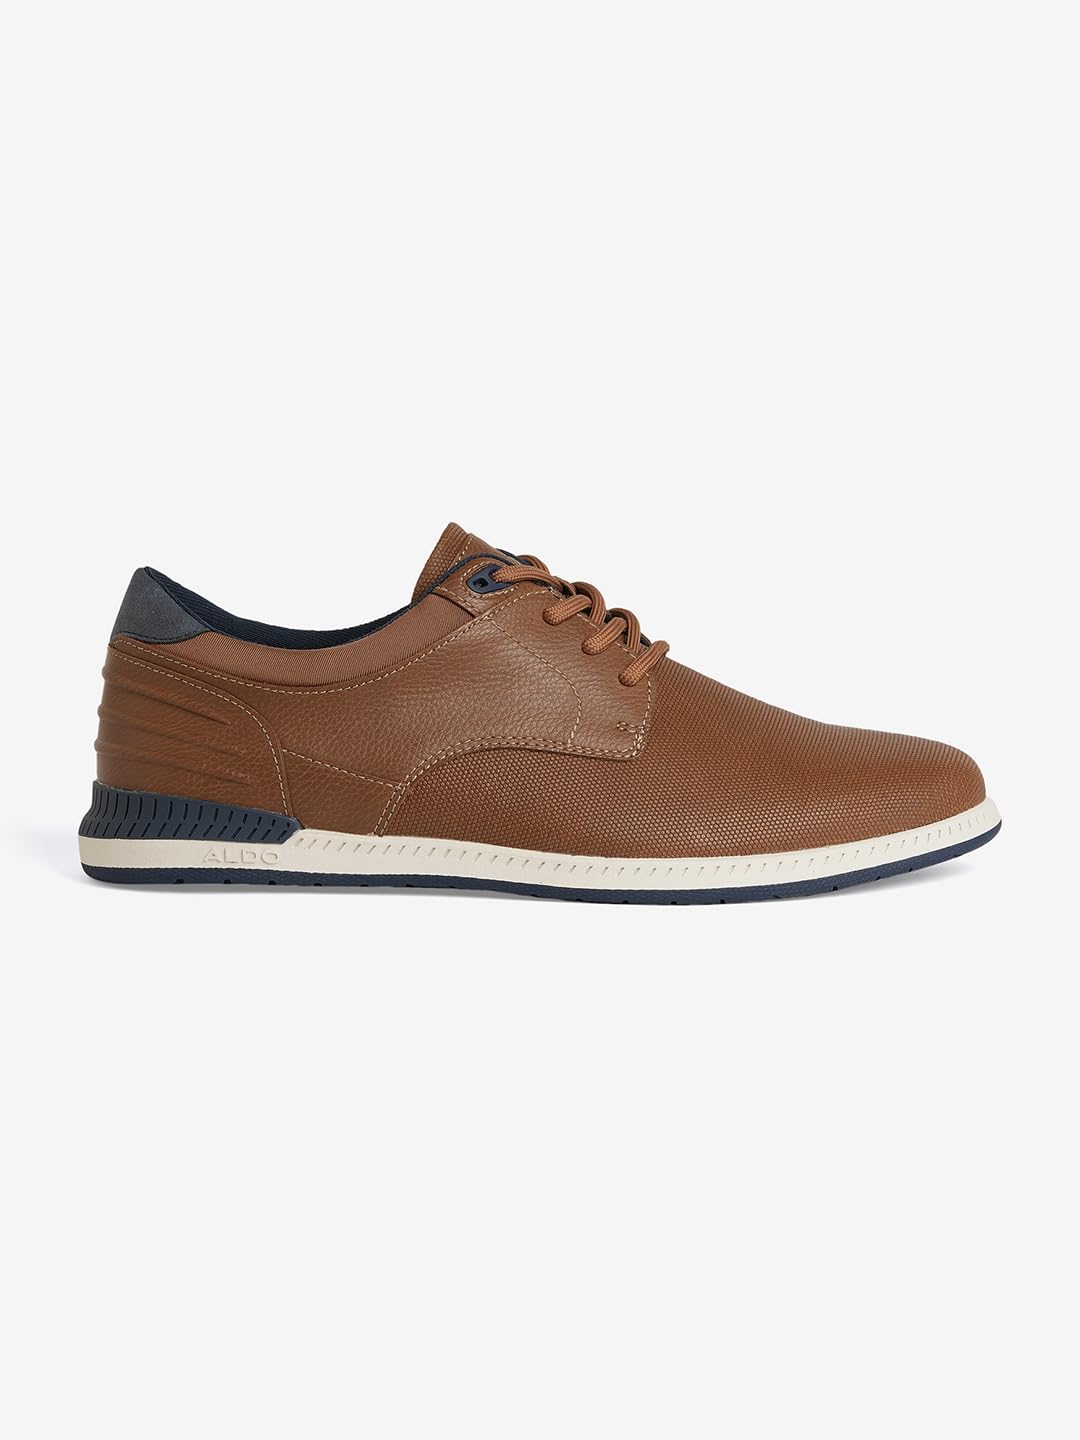 ALDO - LACE-UP Brown Casual Shoes for Men 